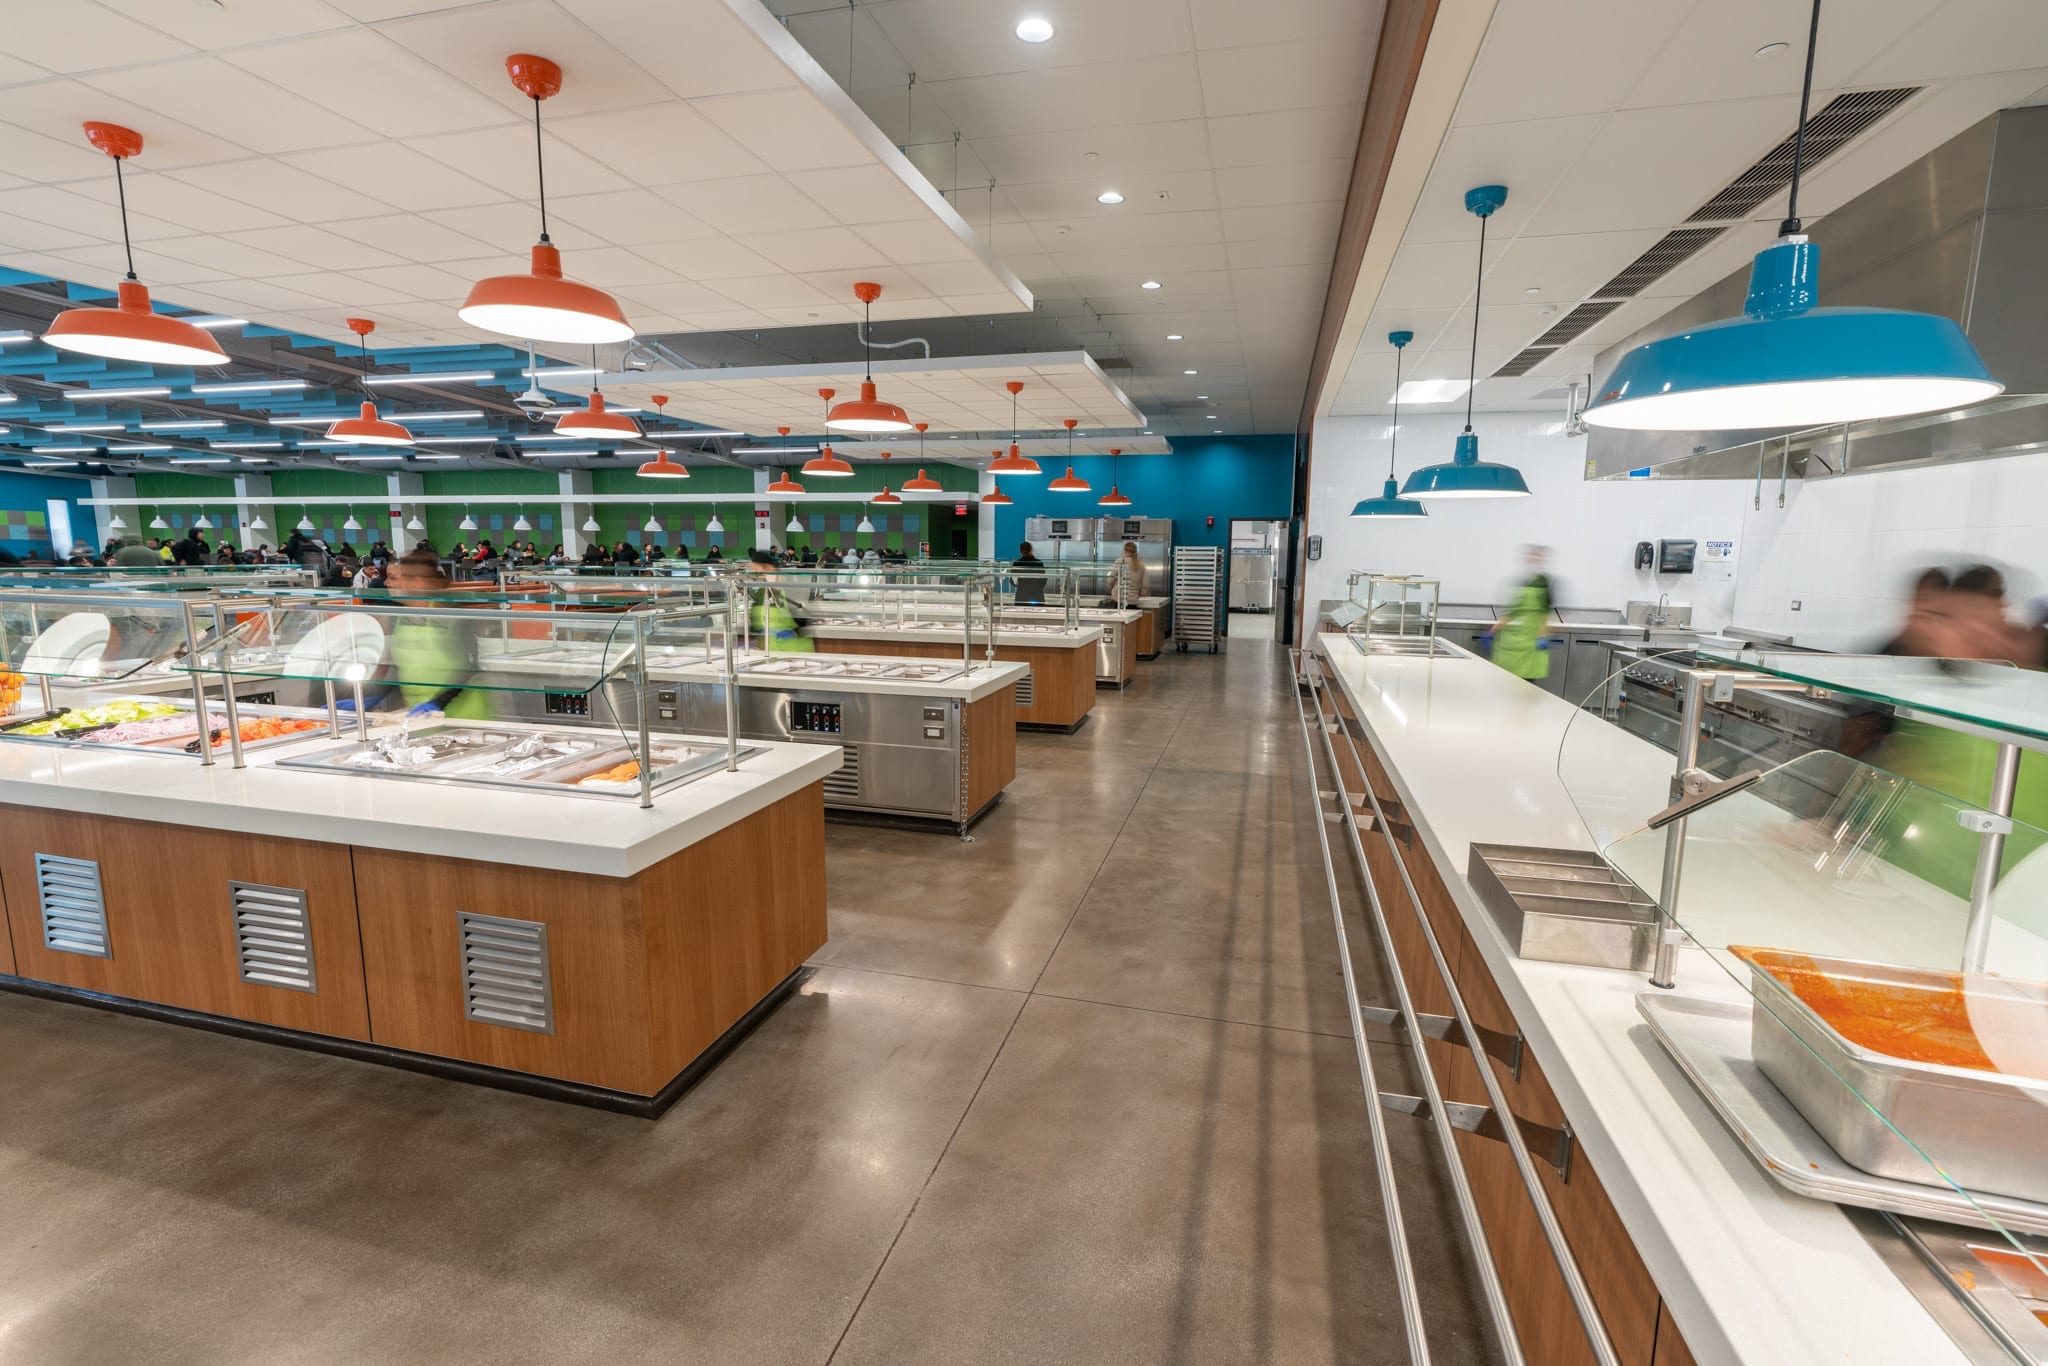 Wonderful Prep Academy cafeteria counters.